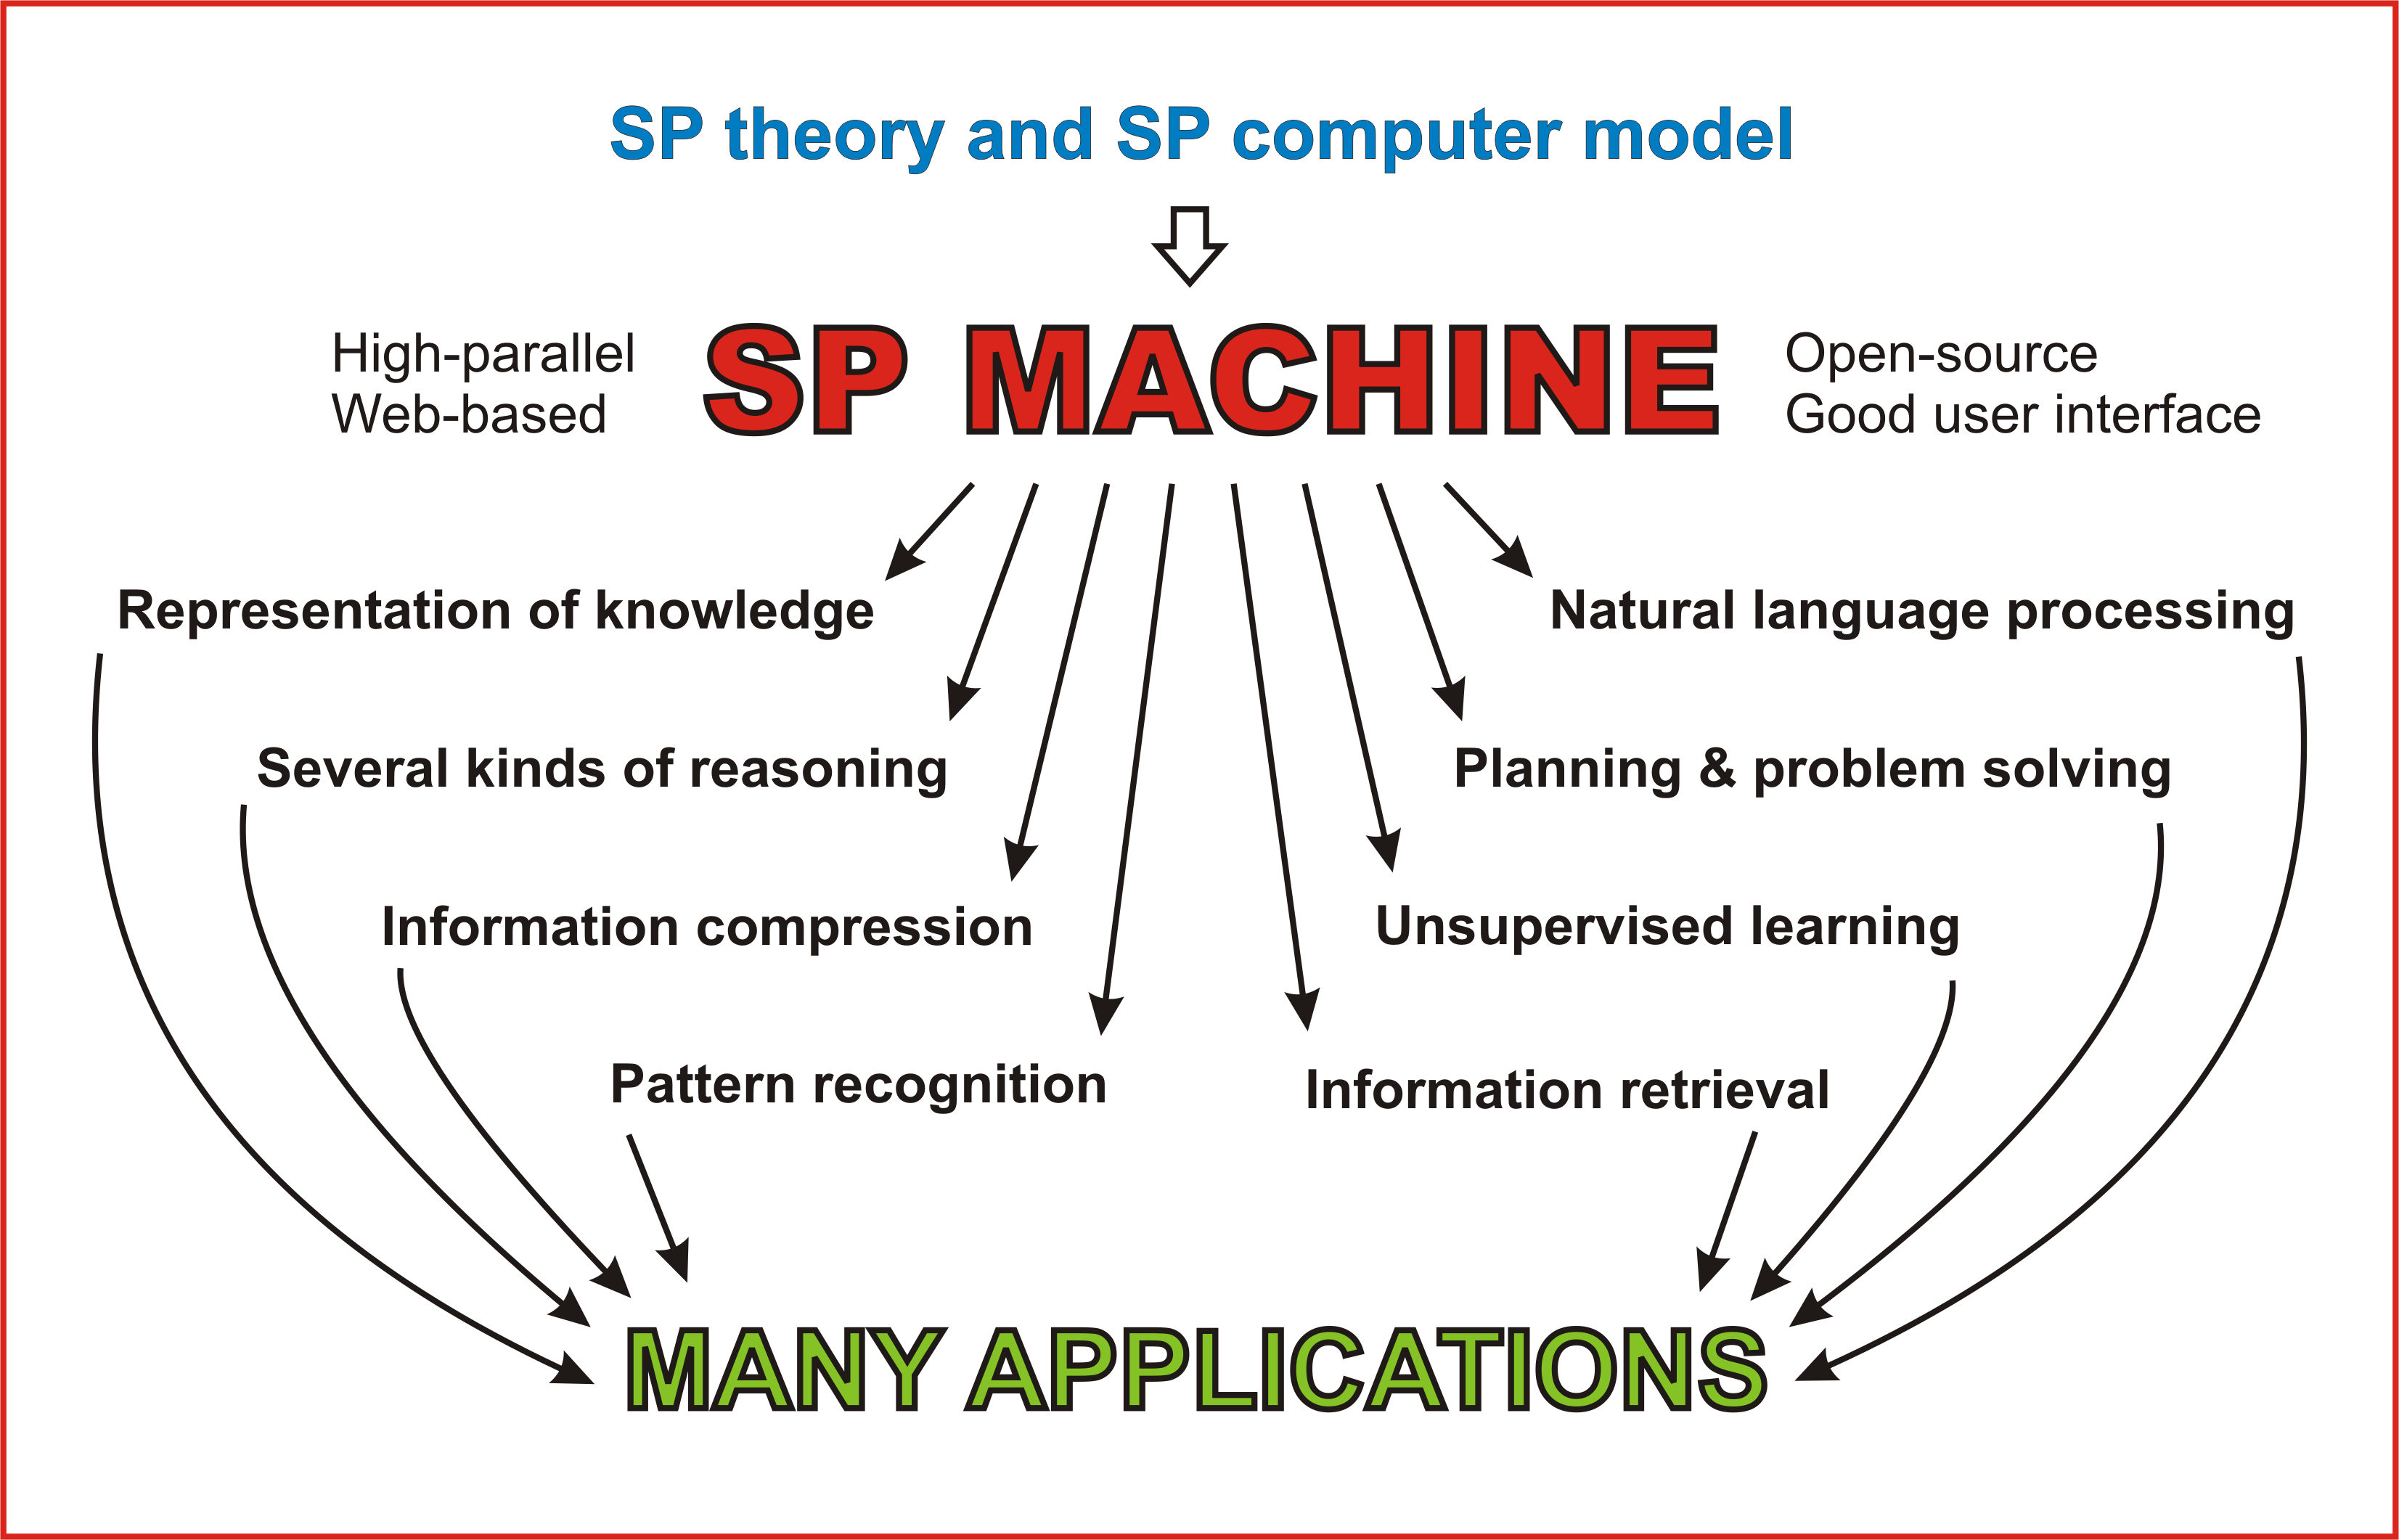 How the SP machine may be developed and applied